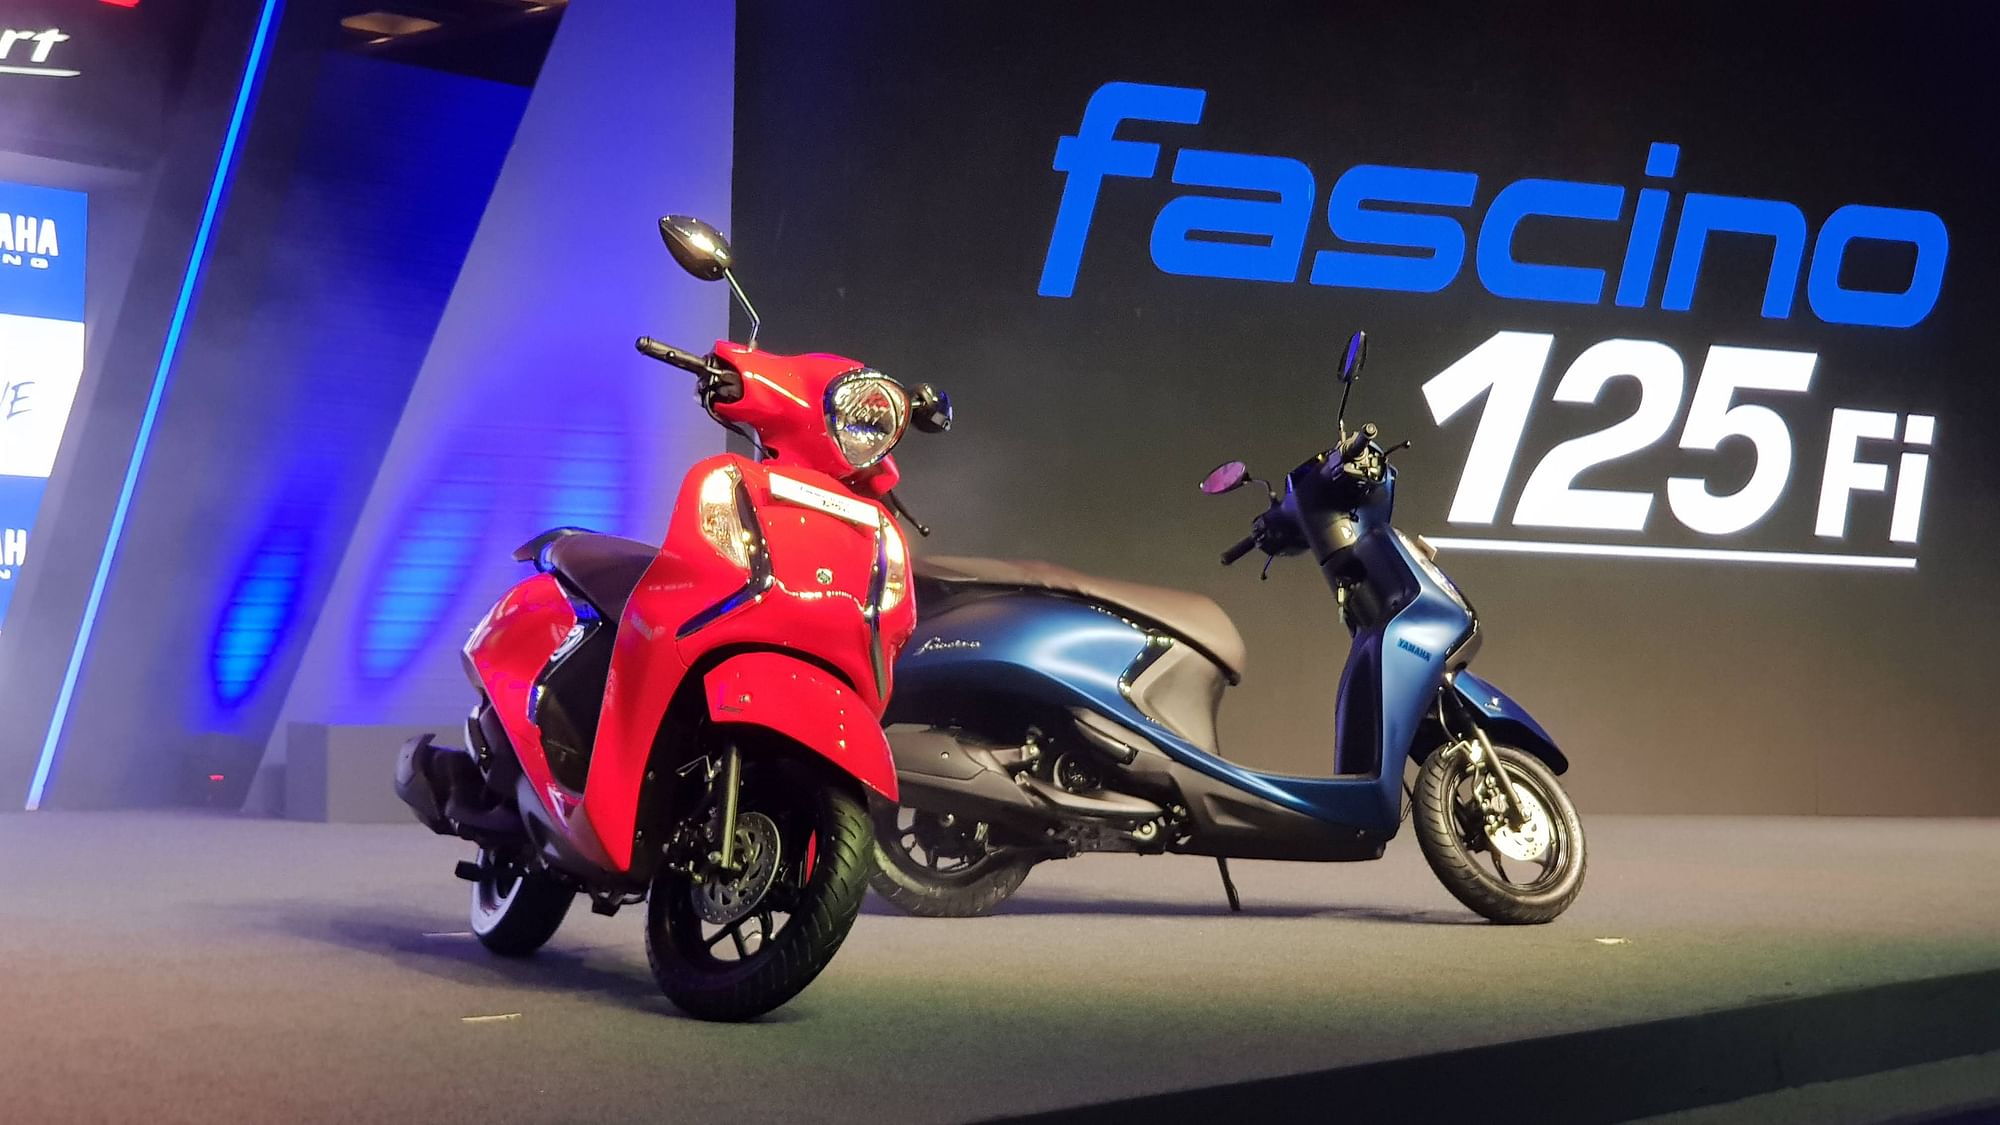 The Fascino 125Fi gets a new engine and minor styling updates.&nbsp;